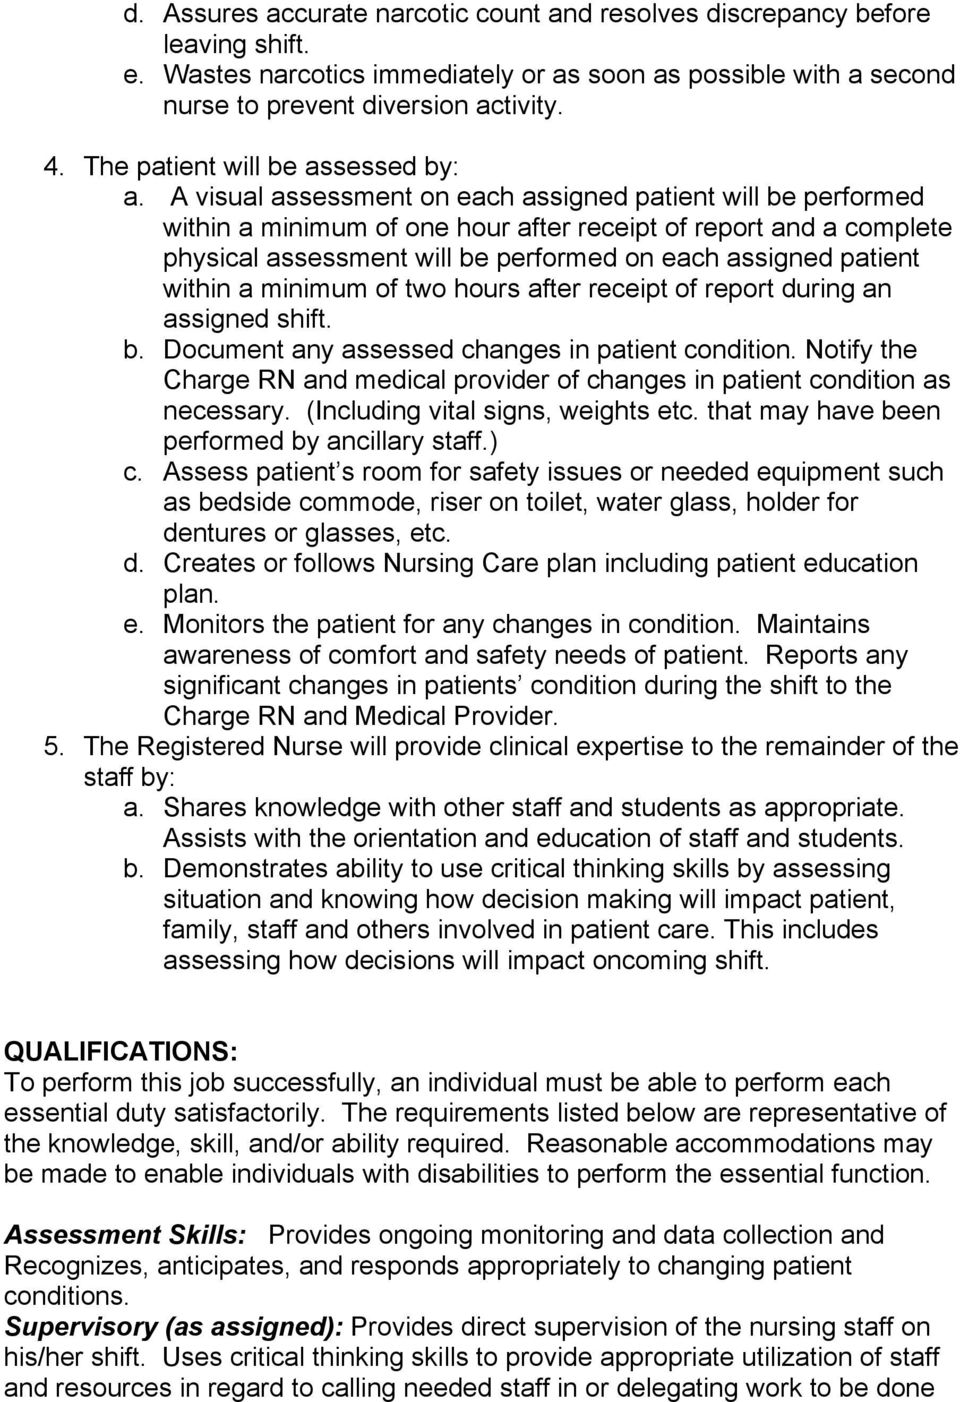 A visual assessment on each assigned patient will be performed within a minimum of one hour after receipt of report and a complete physical assessment will be performed on each assigned patient